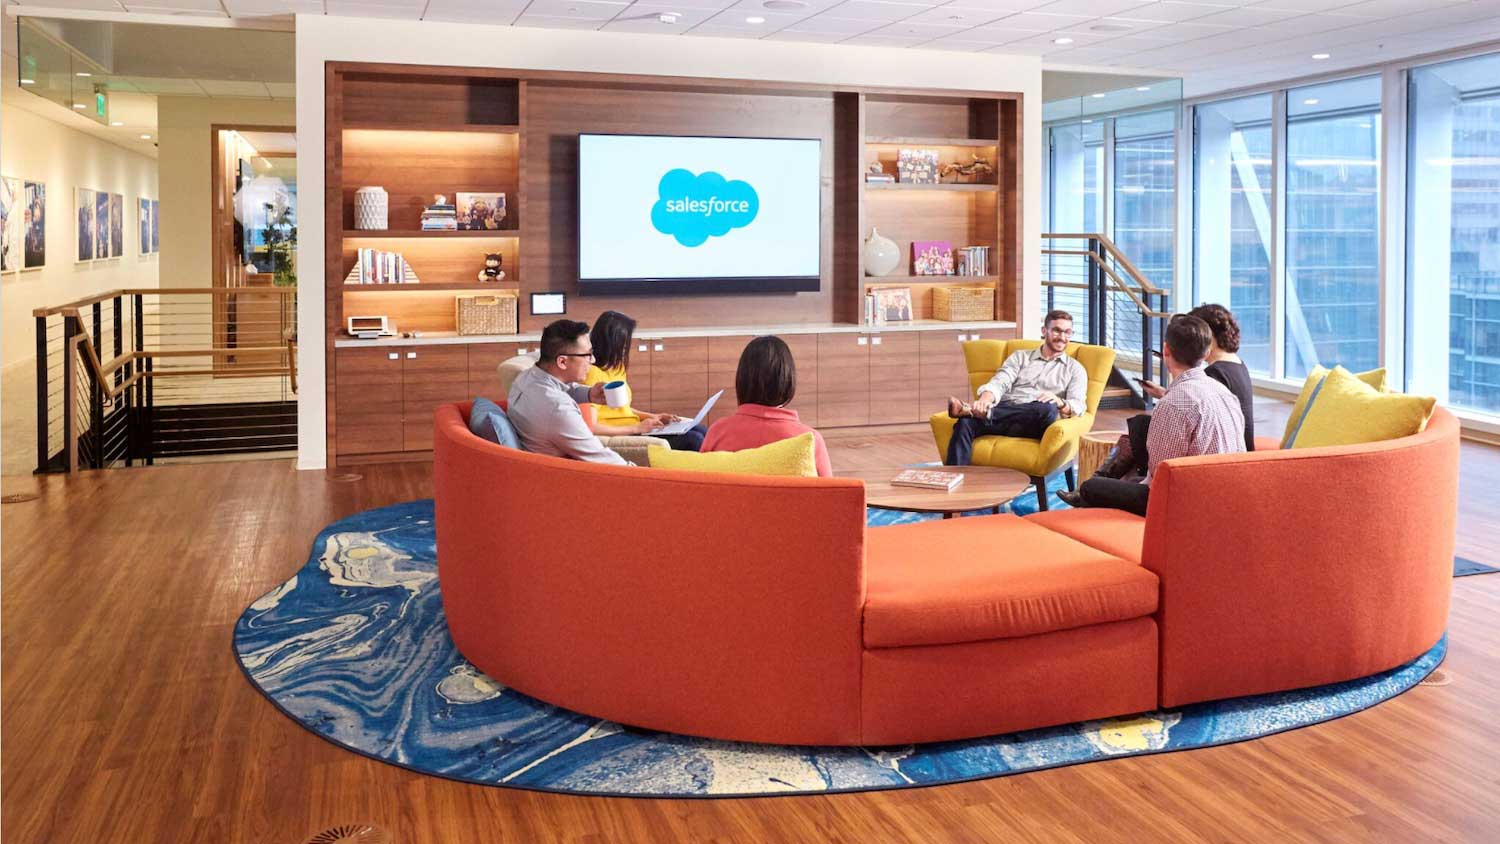 Salesforce colleagues in a lounge